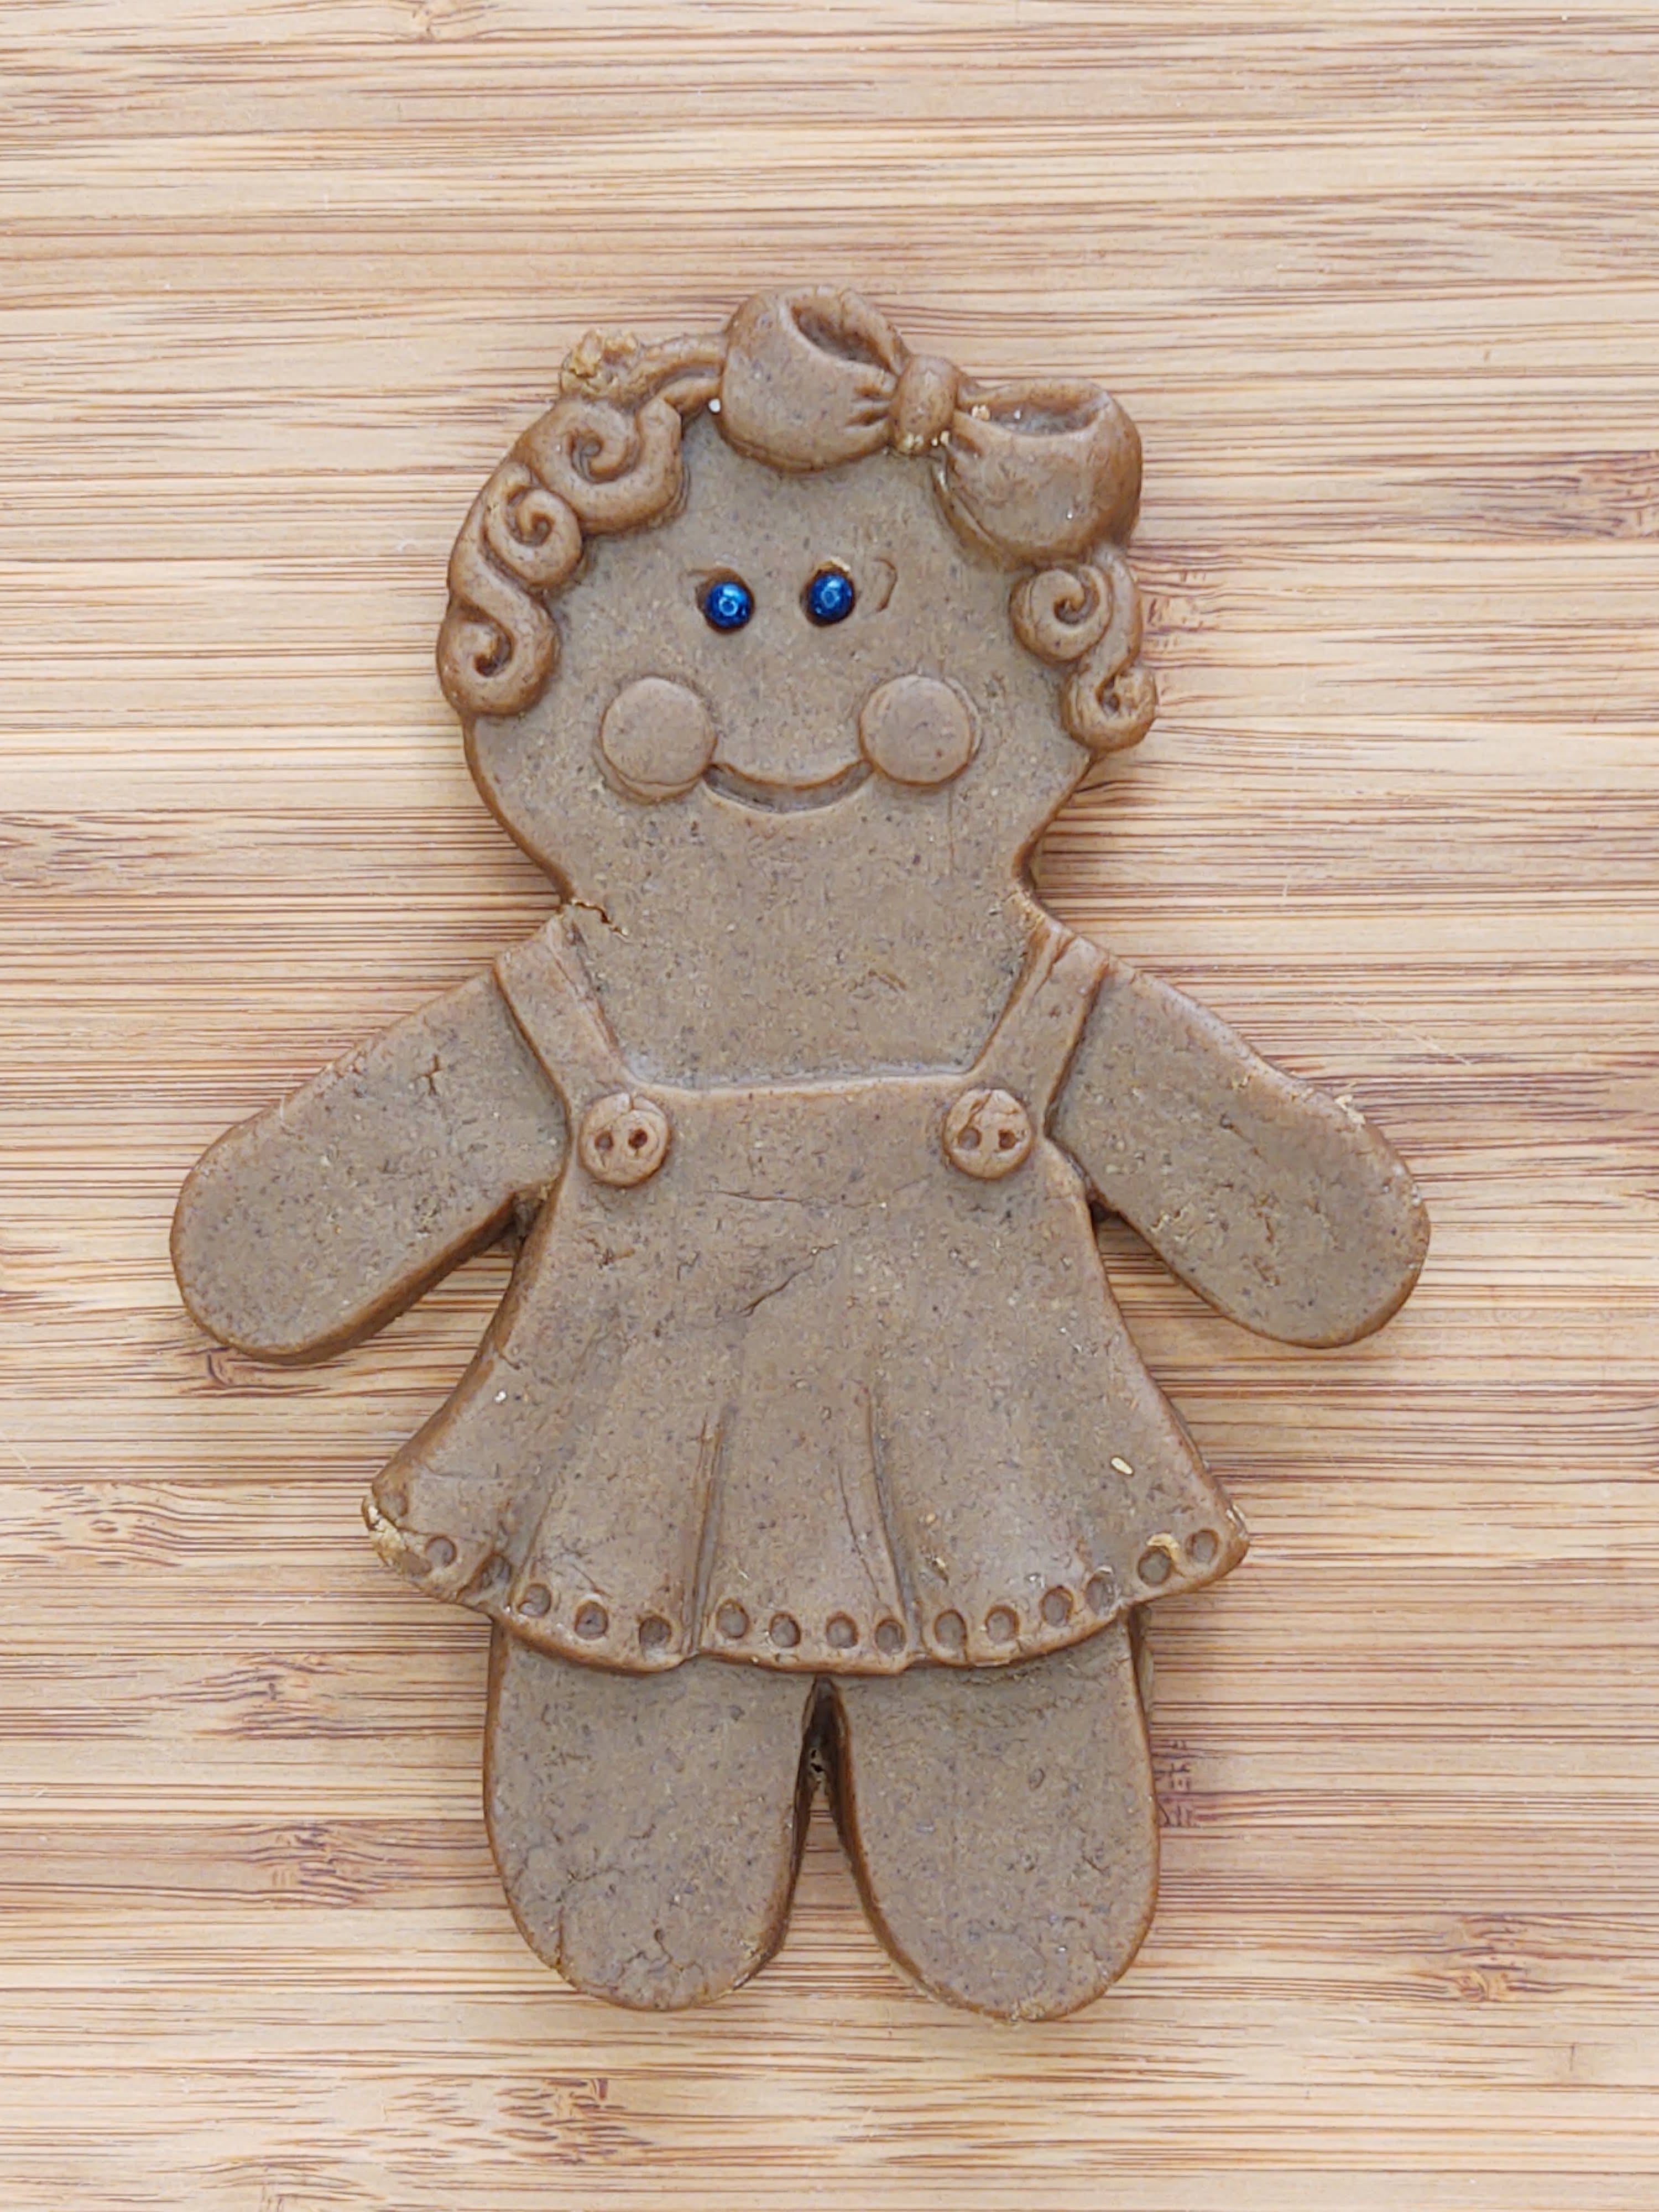 Mini Gingerbread Man Silicone Cookie Mold – Artesão Cookie Molds